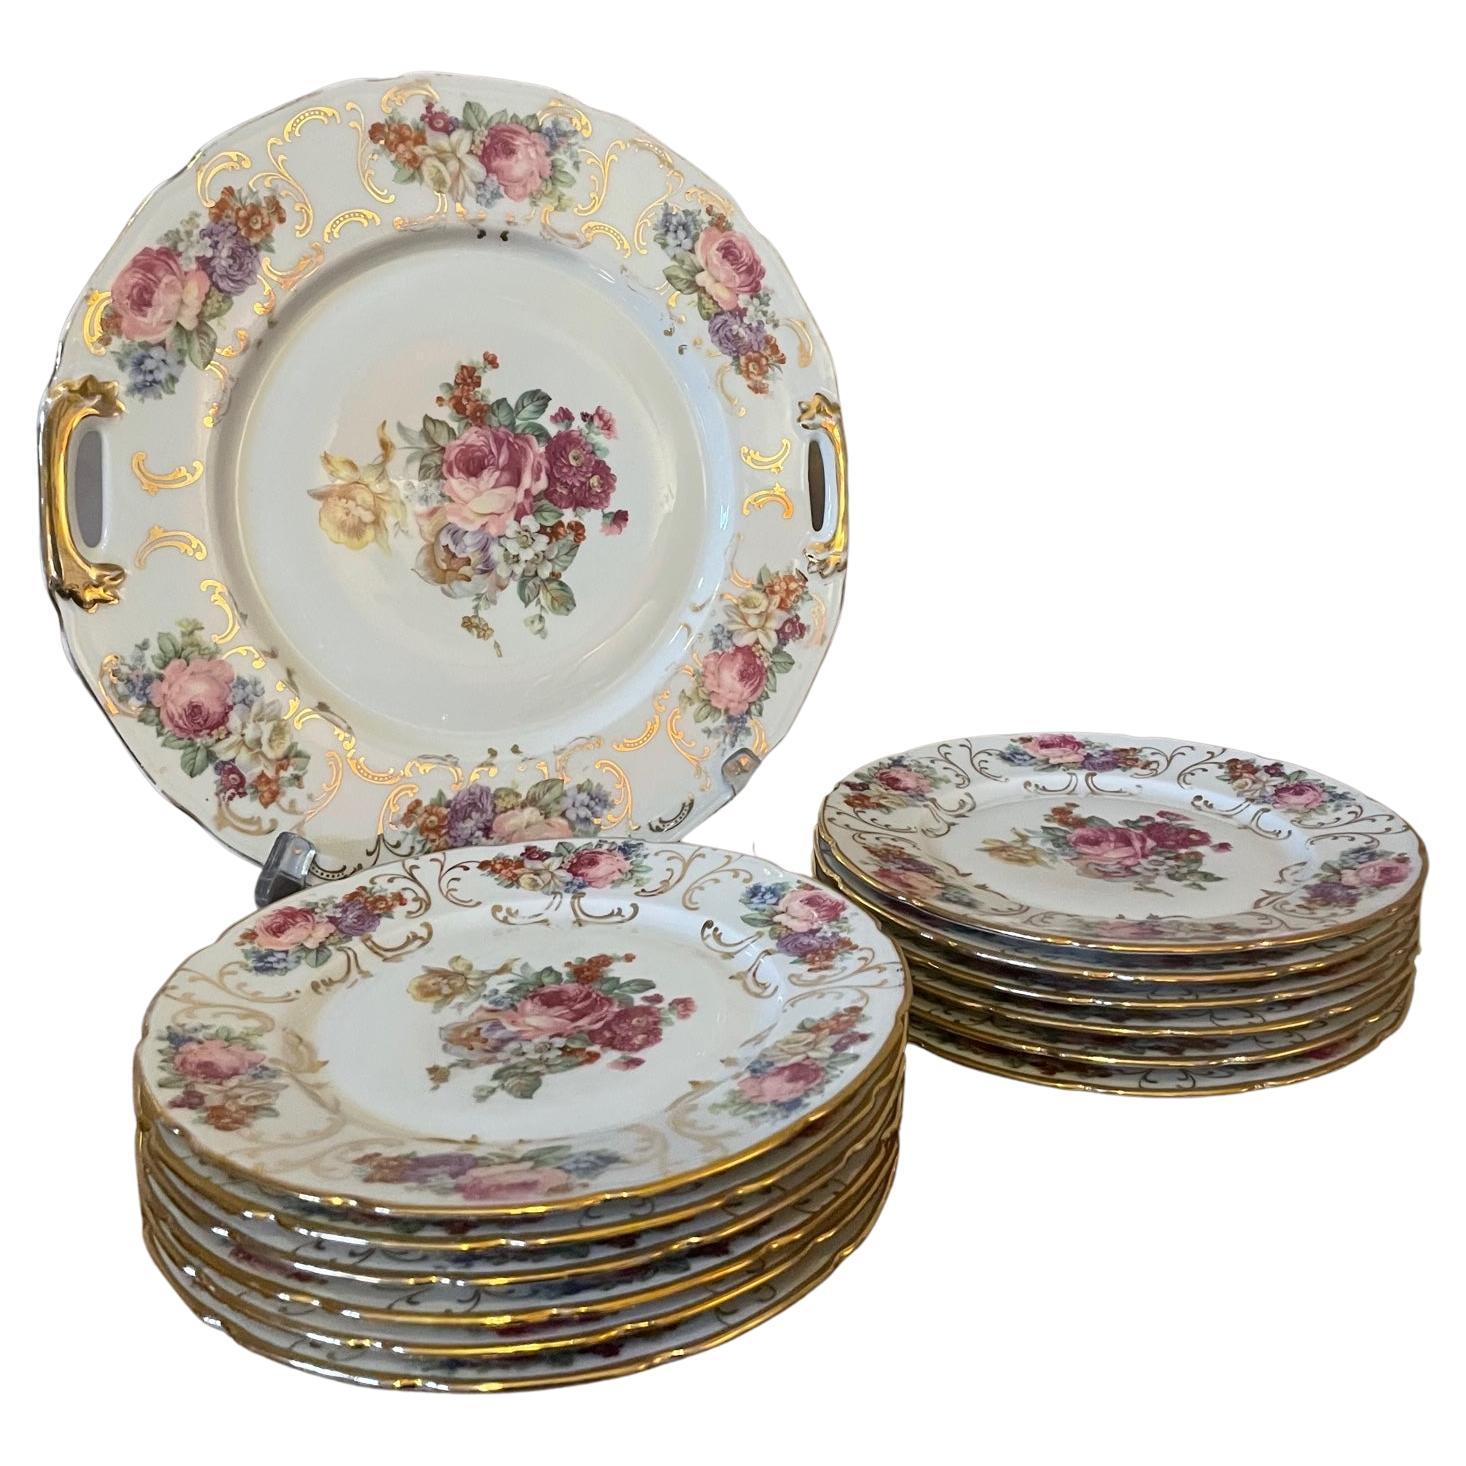 20th Century French Limoges Set of Twelve Porcelain Plates and Plater